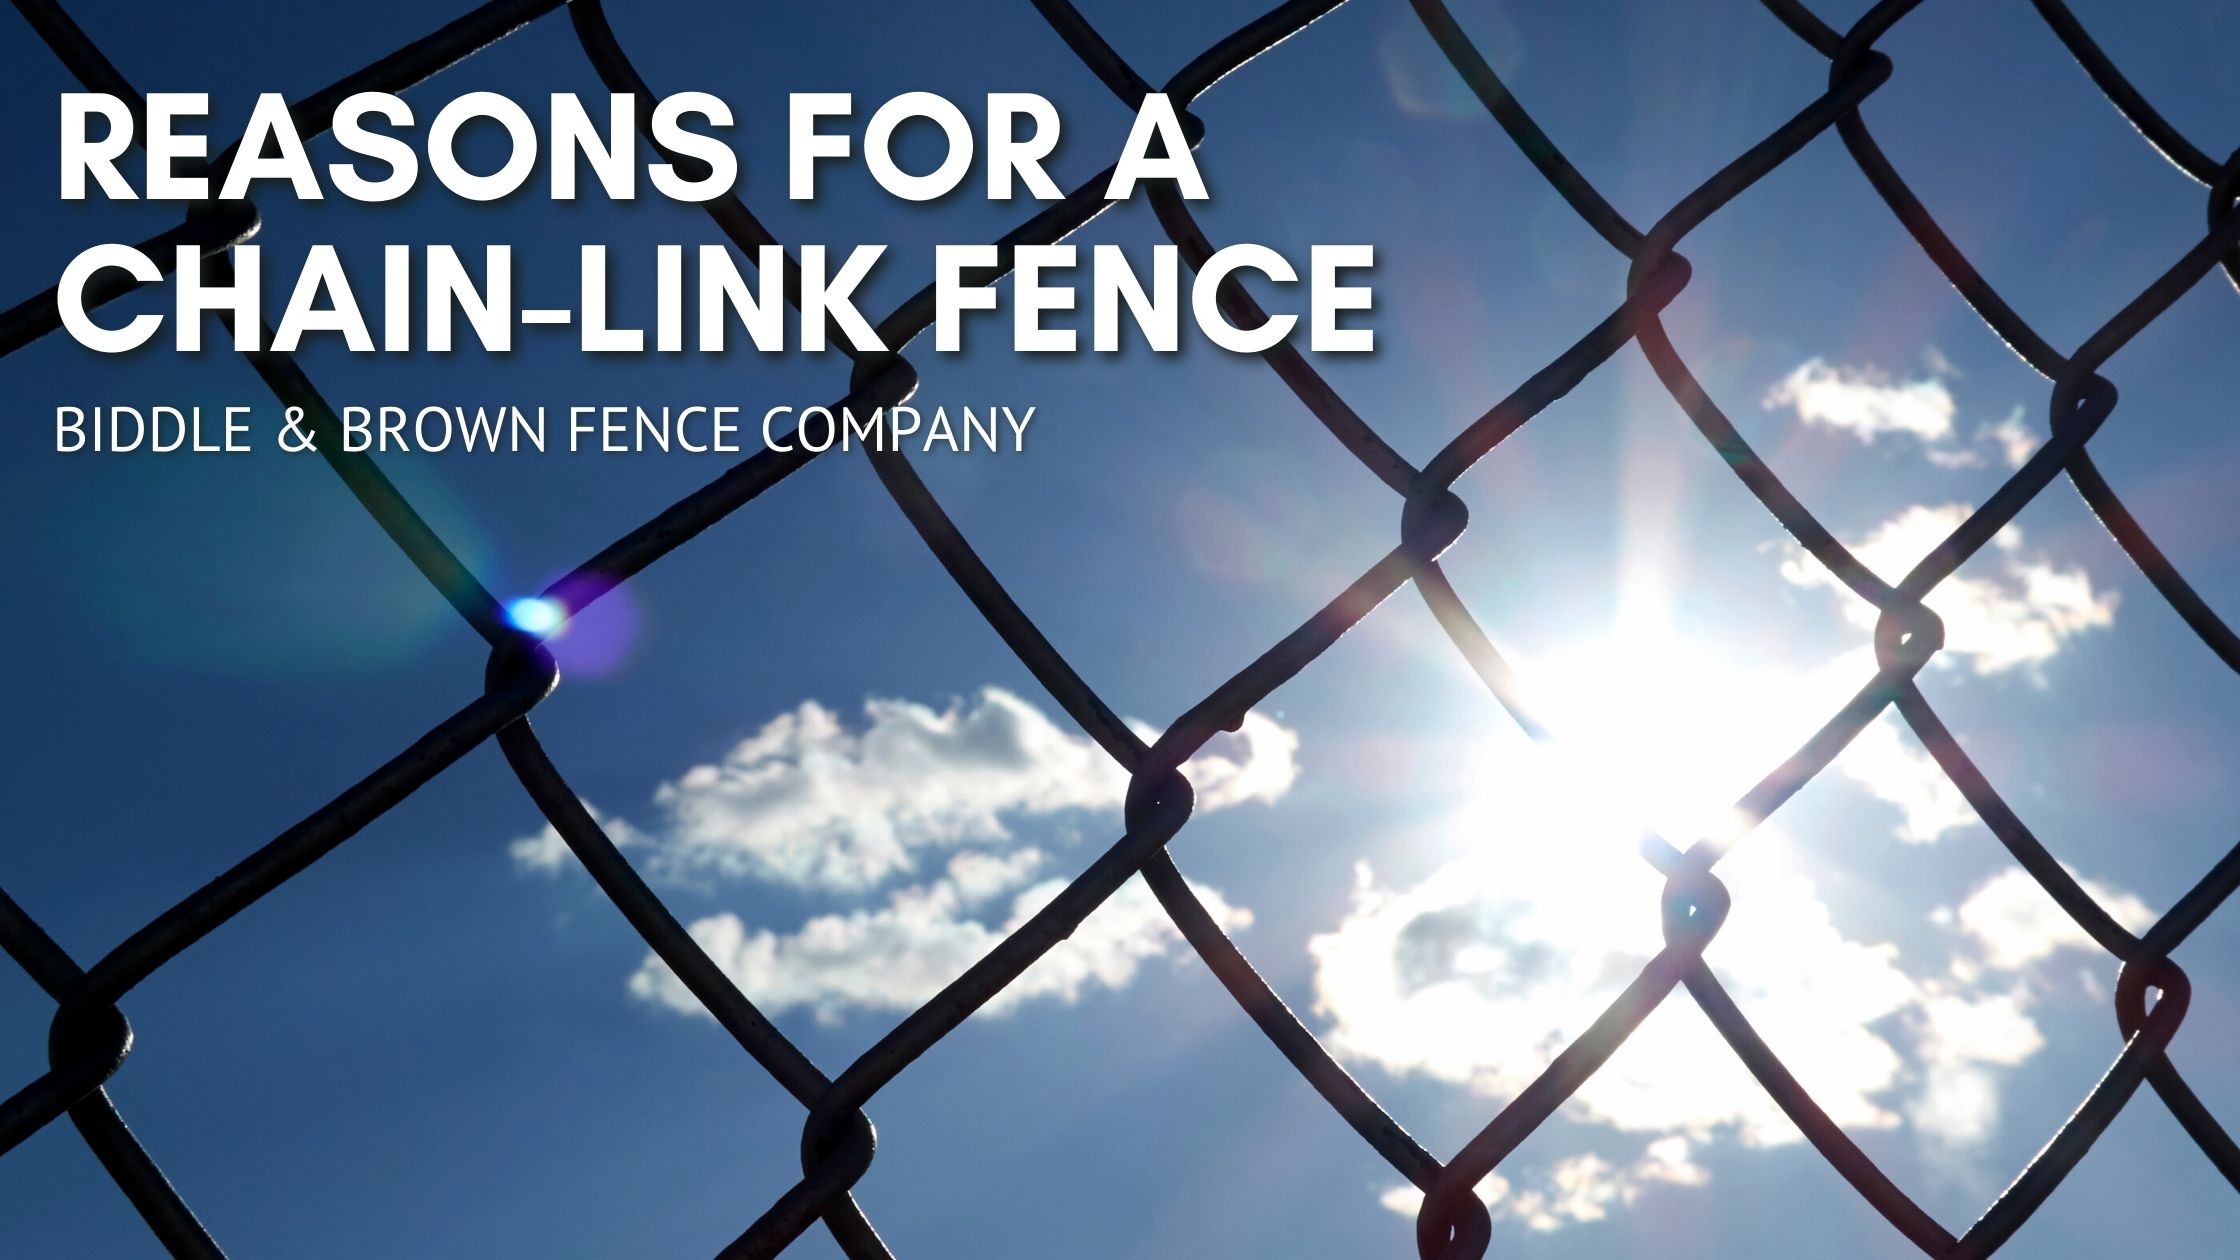 Reasons for a Chain-Link Fence